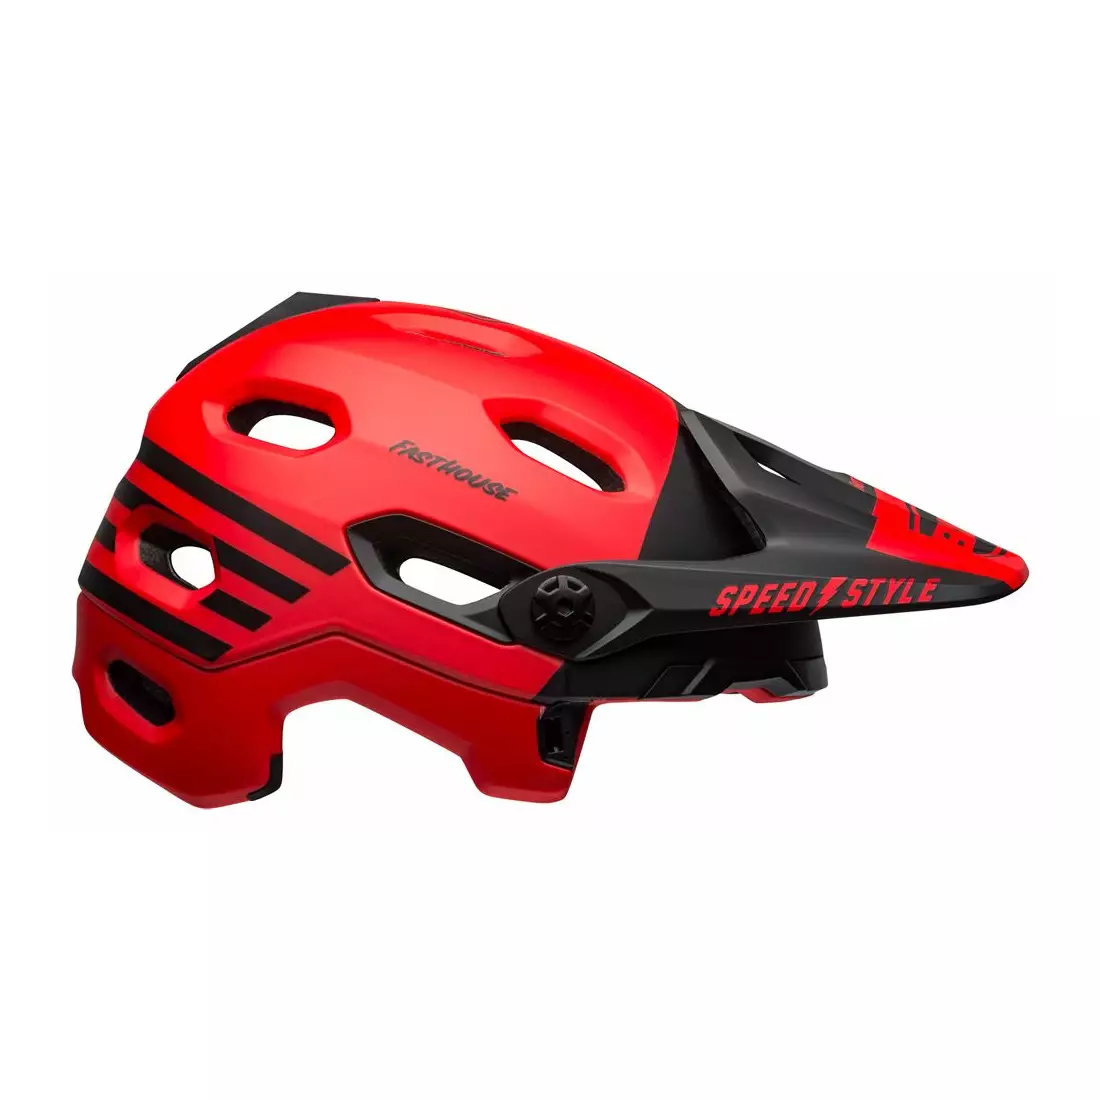 BELL SUPER DH MIPS SPHERICAL kask rowerowy full face, fasthouse matte gloss red black